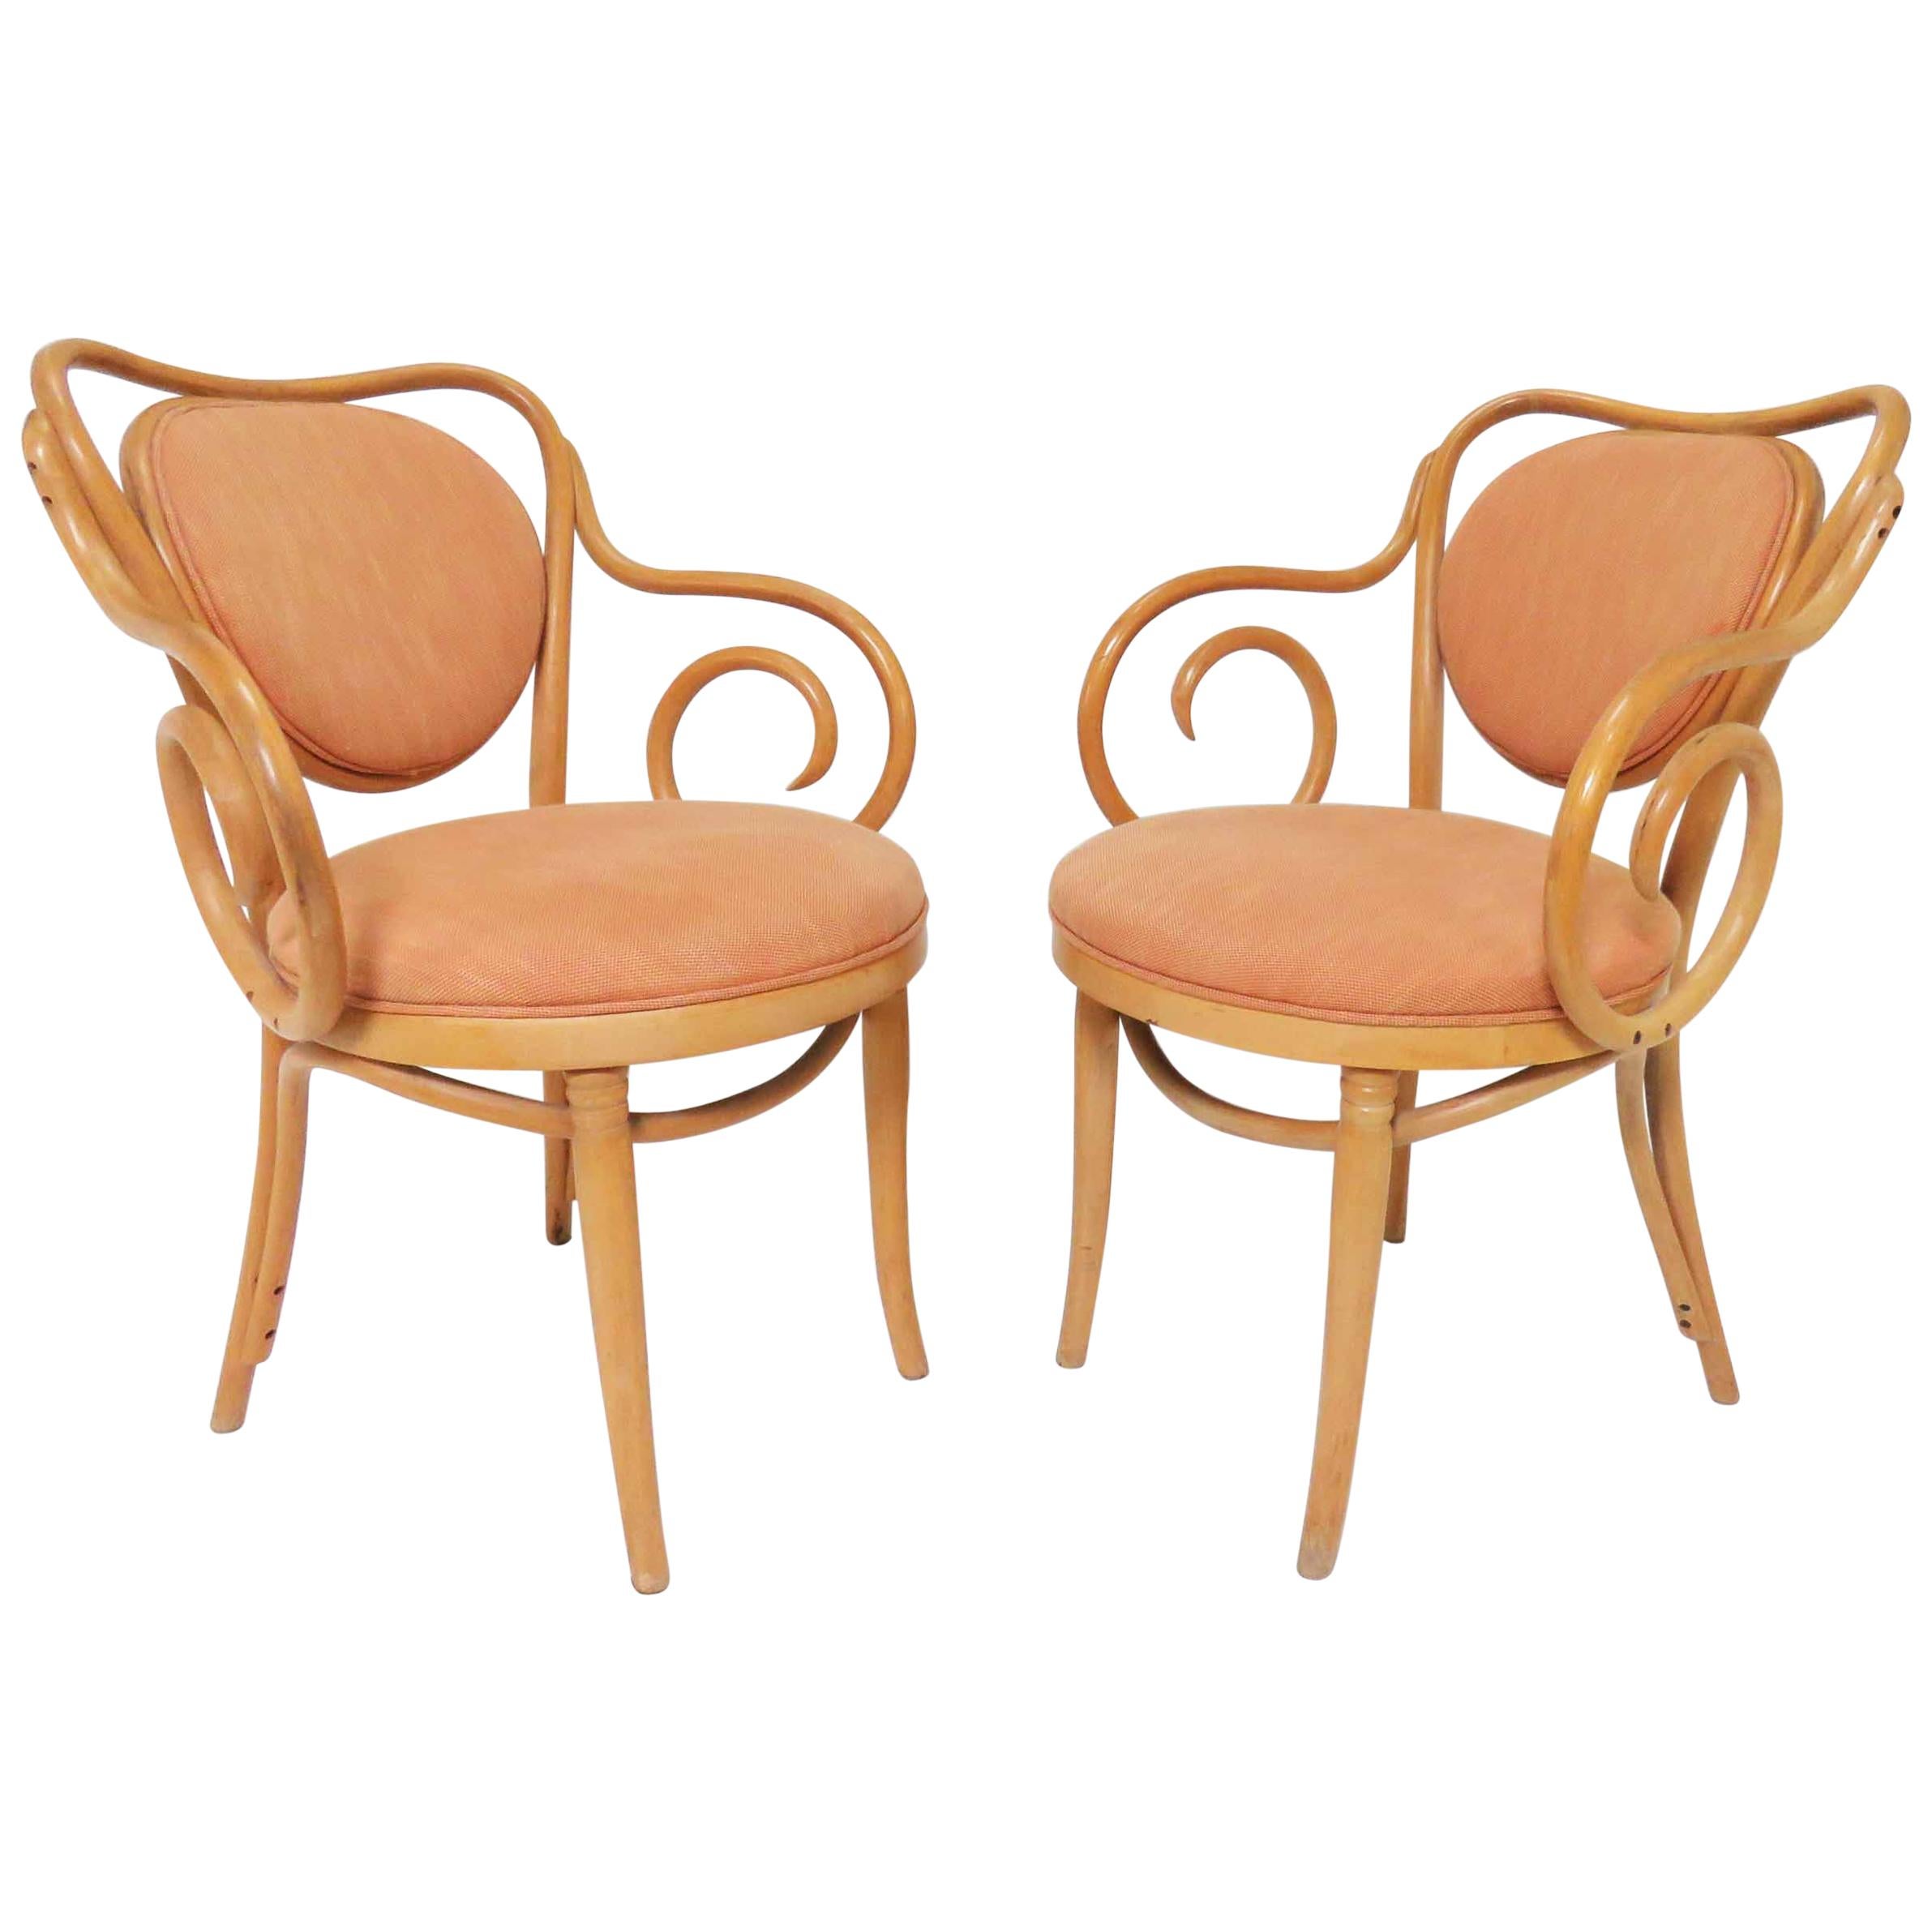 Pair of Bentwood Armchairs in the Manner of Thonet No. 5, circa 1950s